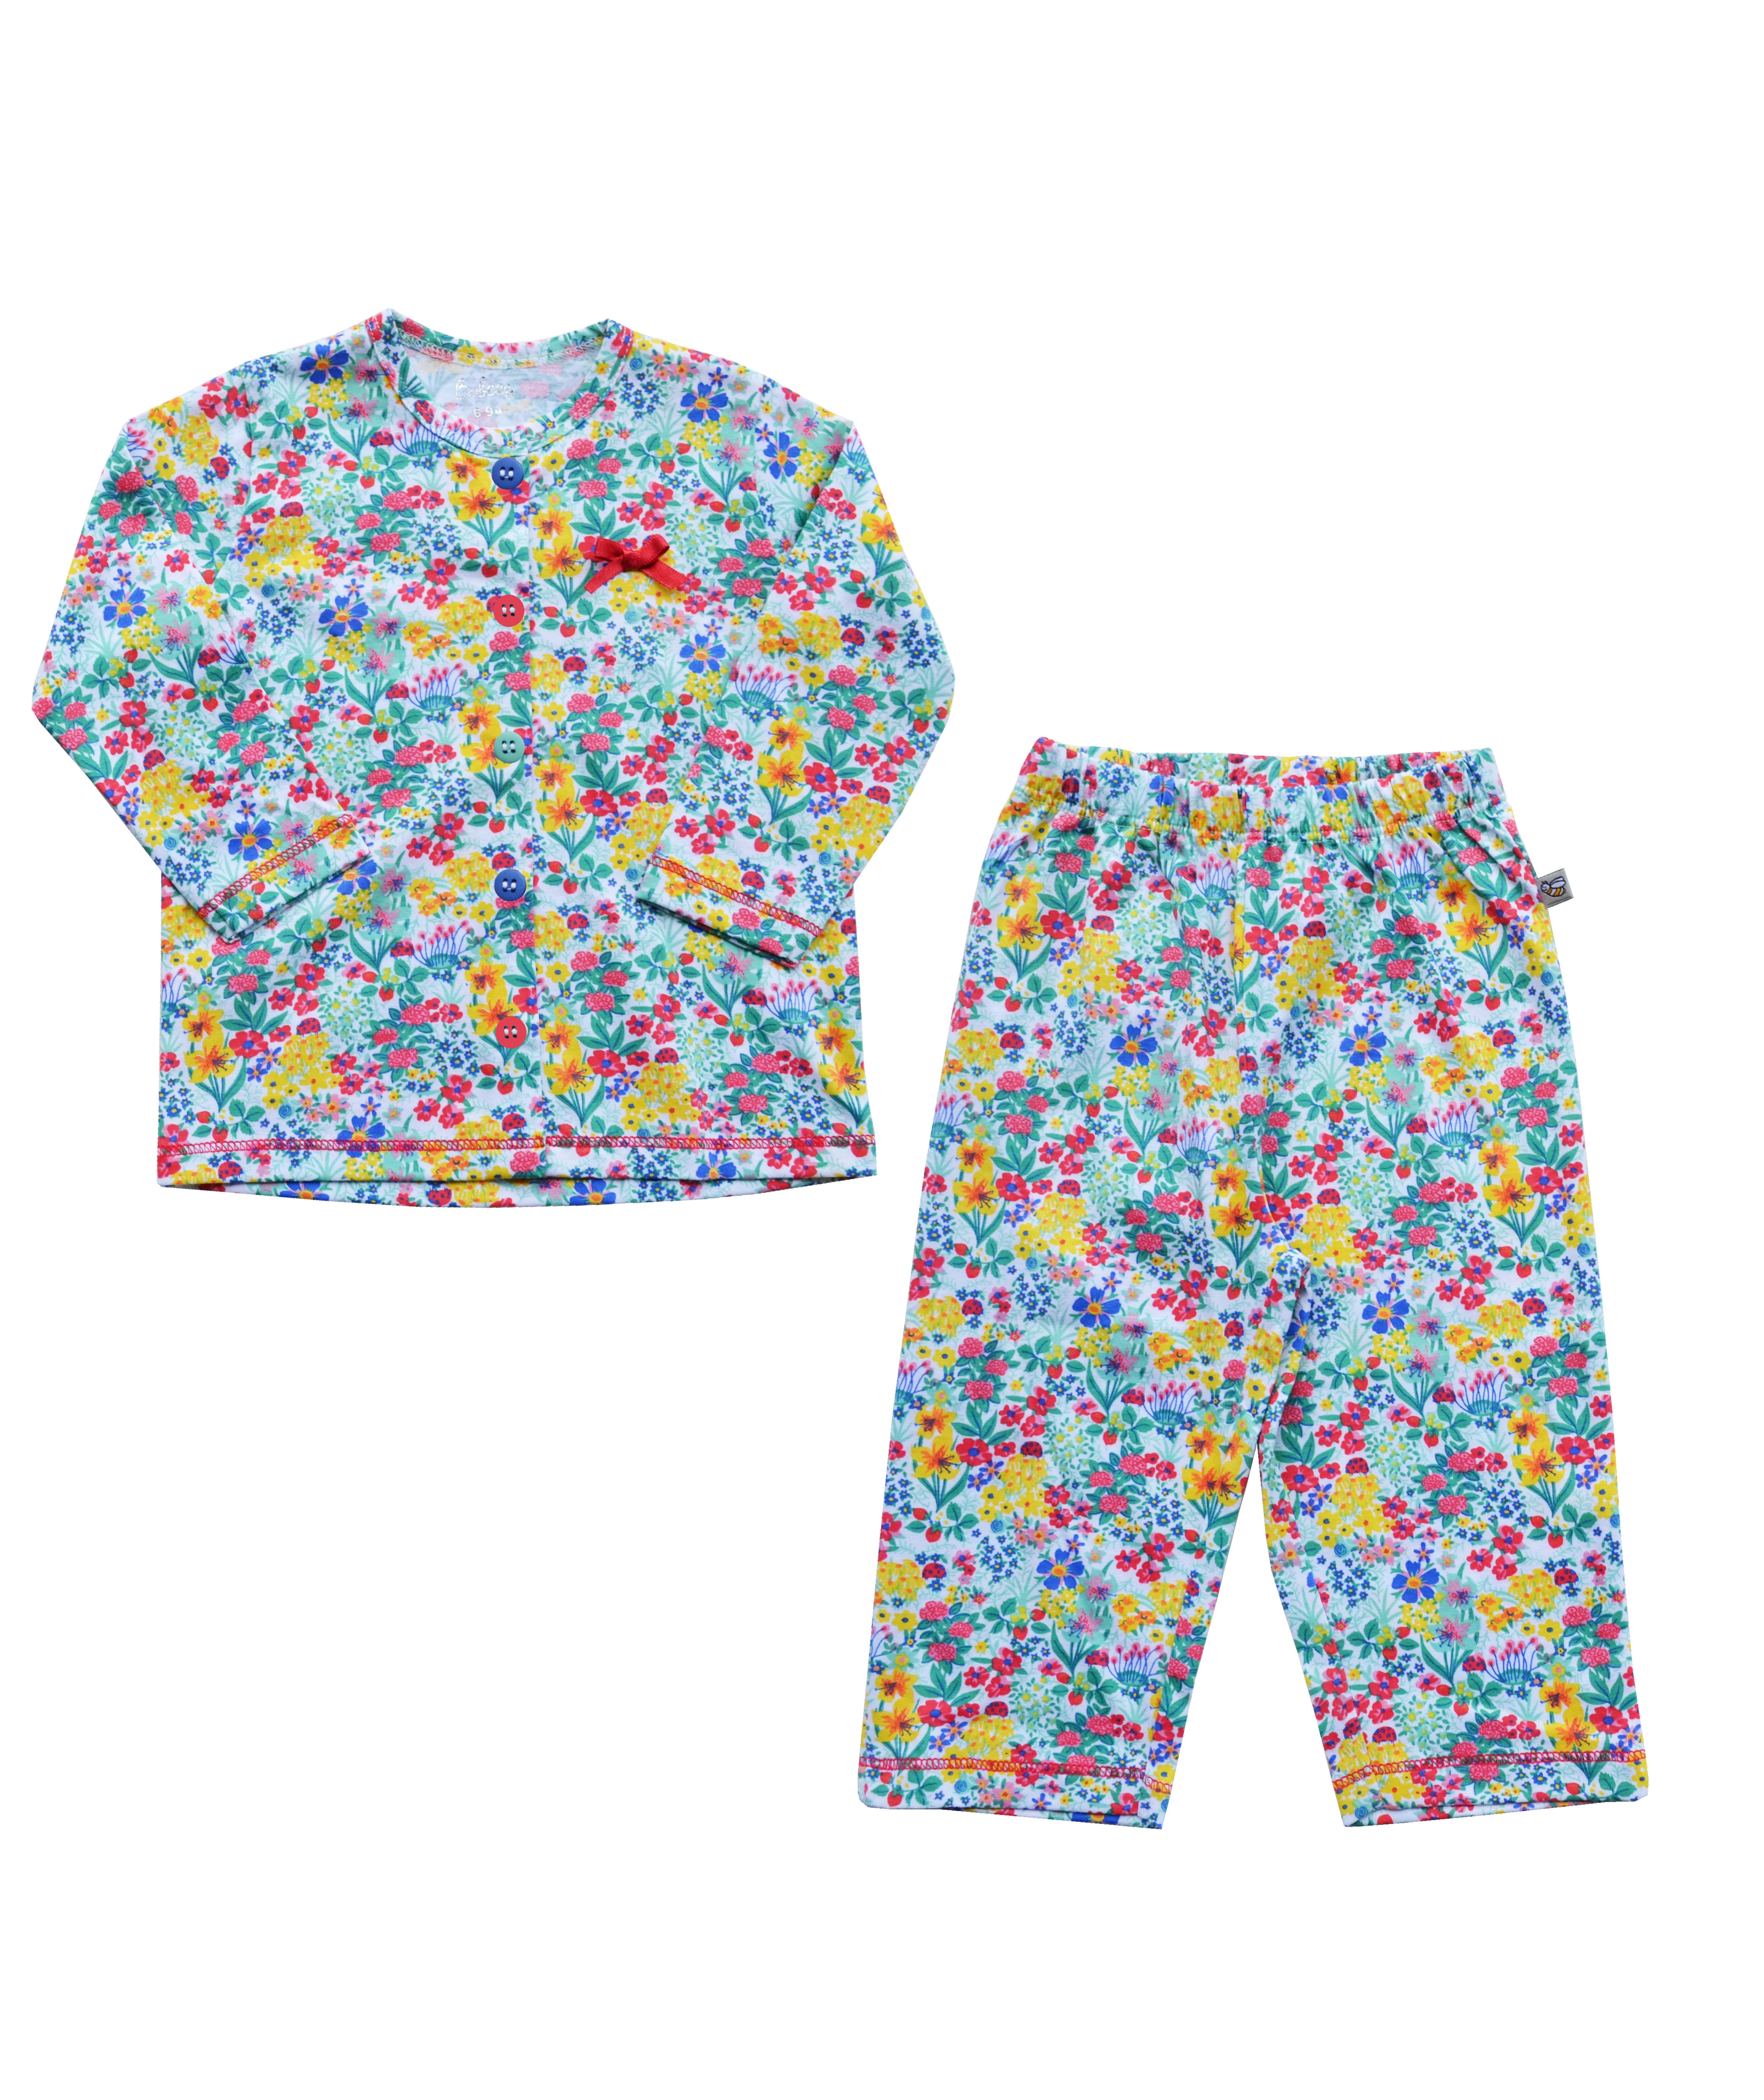 Allover Multicolored Flower Print Full Sleeves Top + Pyjama Set (100% Cotton Jersey)